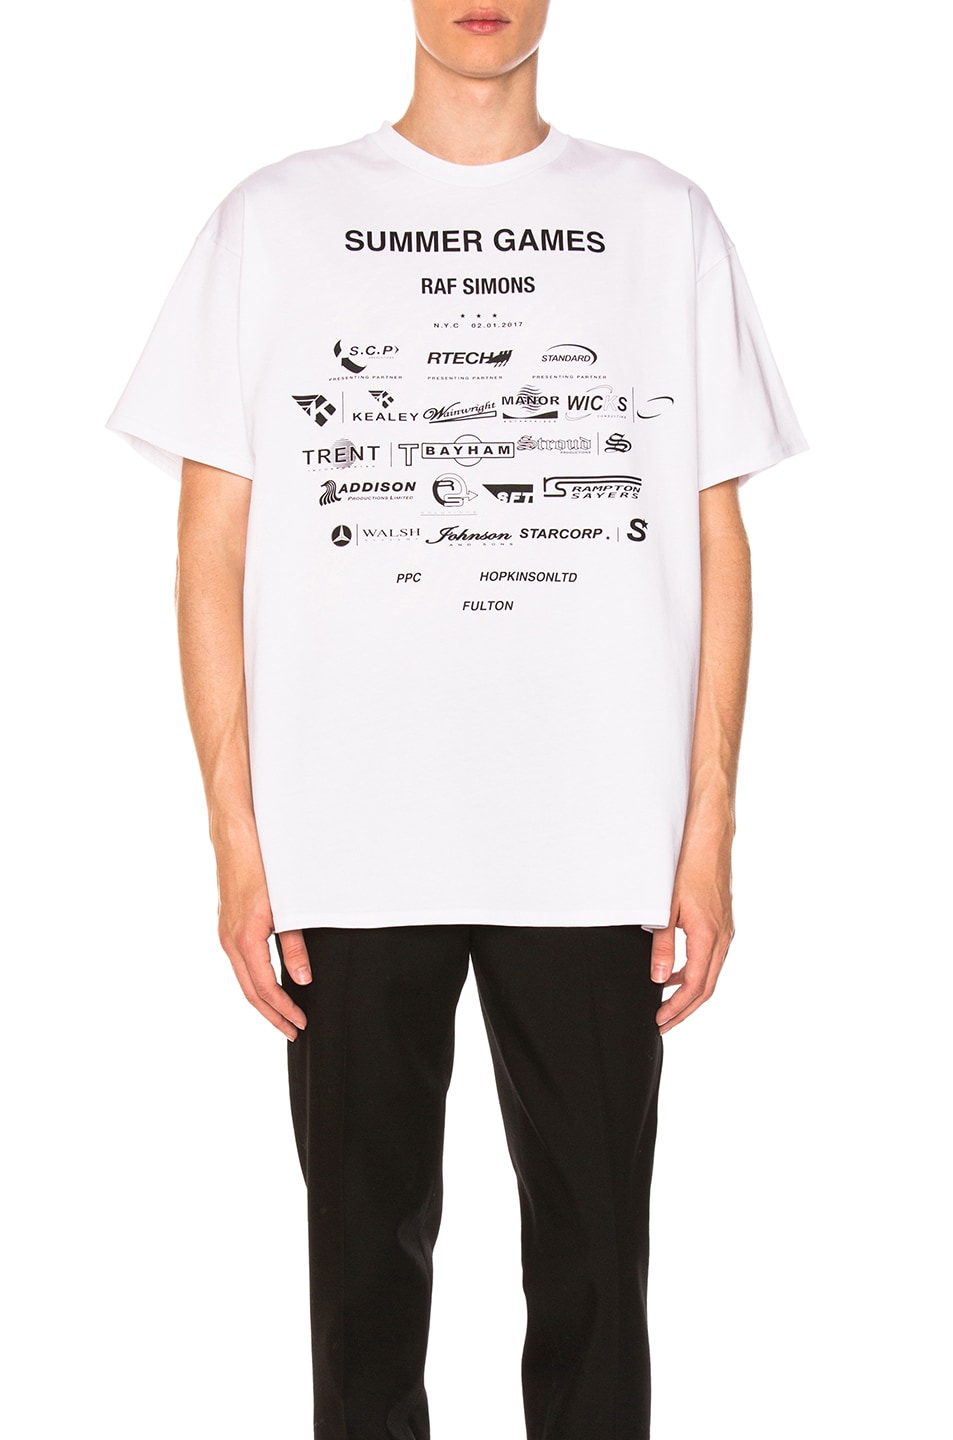 Image 1 of Raf Simons Easy Fit Summer Games Tee in White & Black